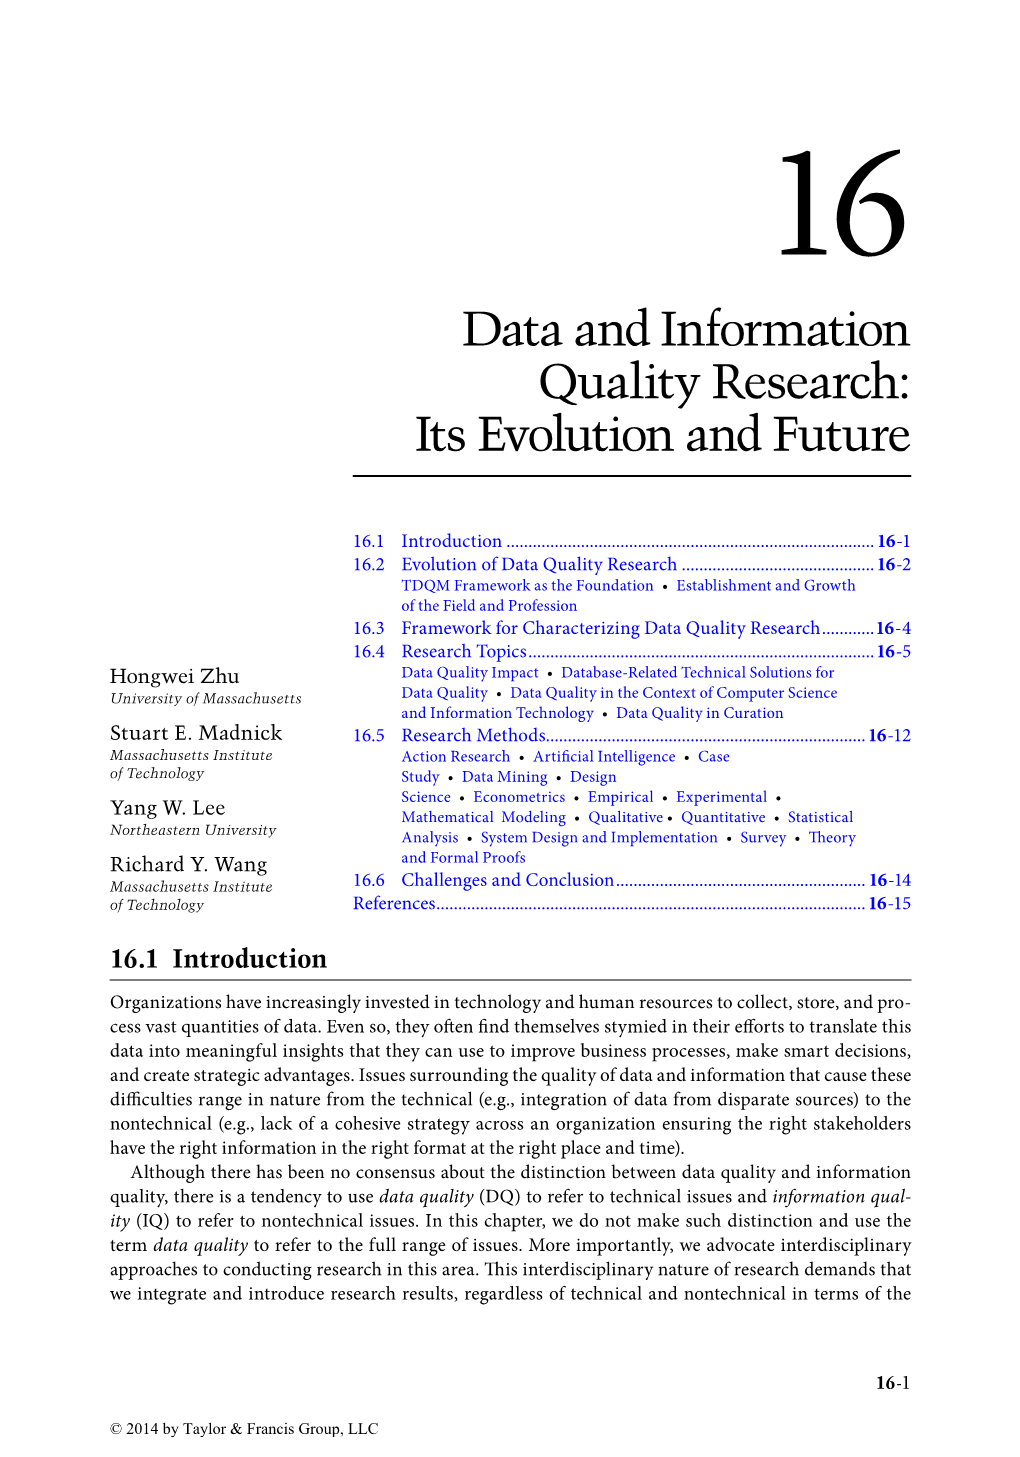 Data and Information Quality Research: Its Evolution and Future